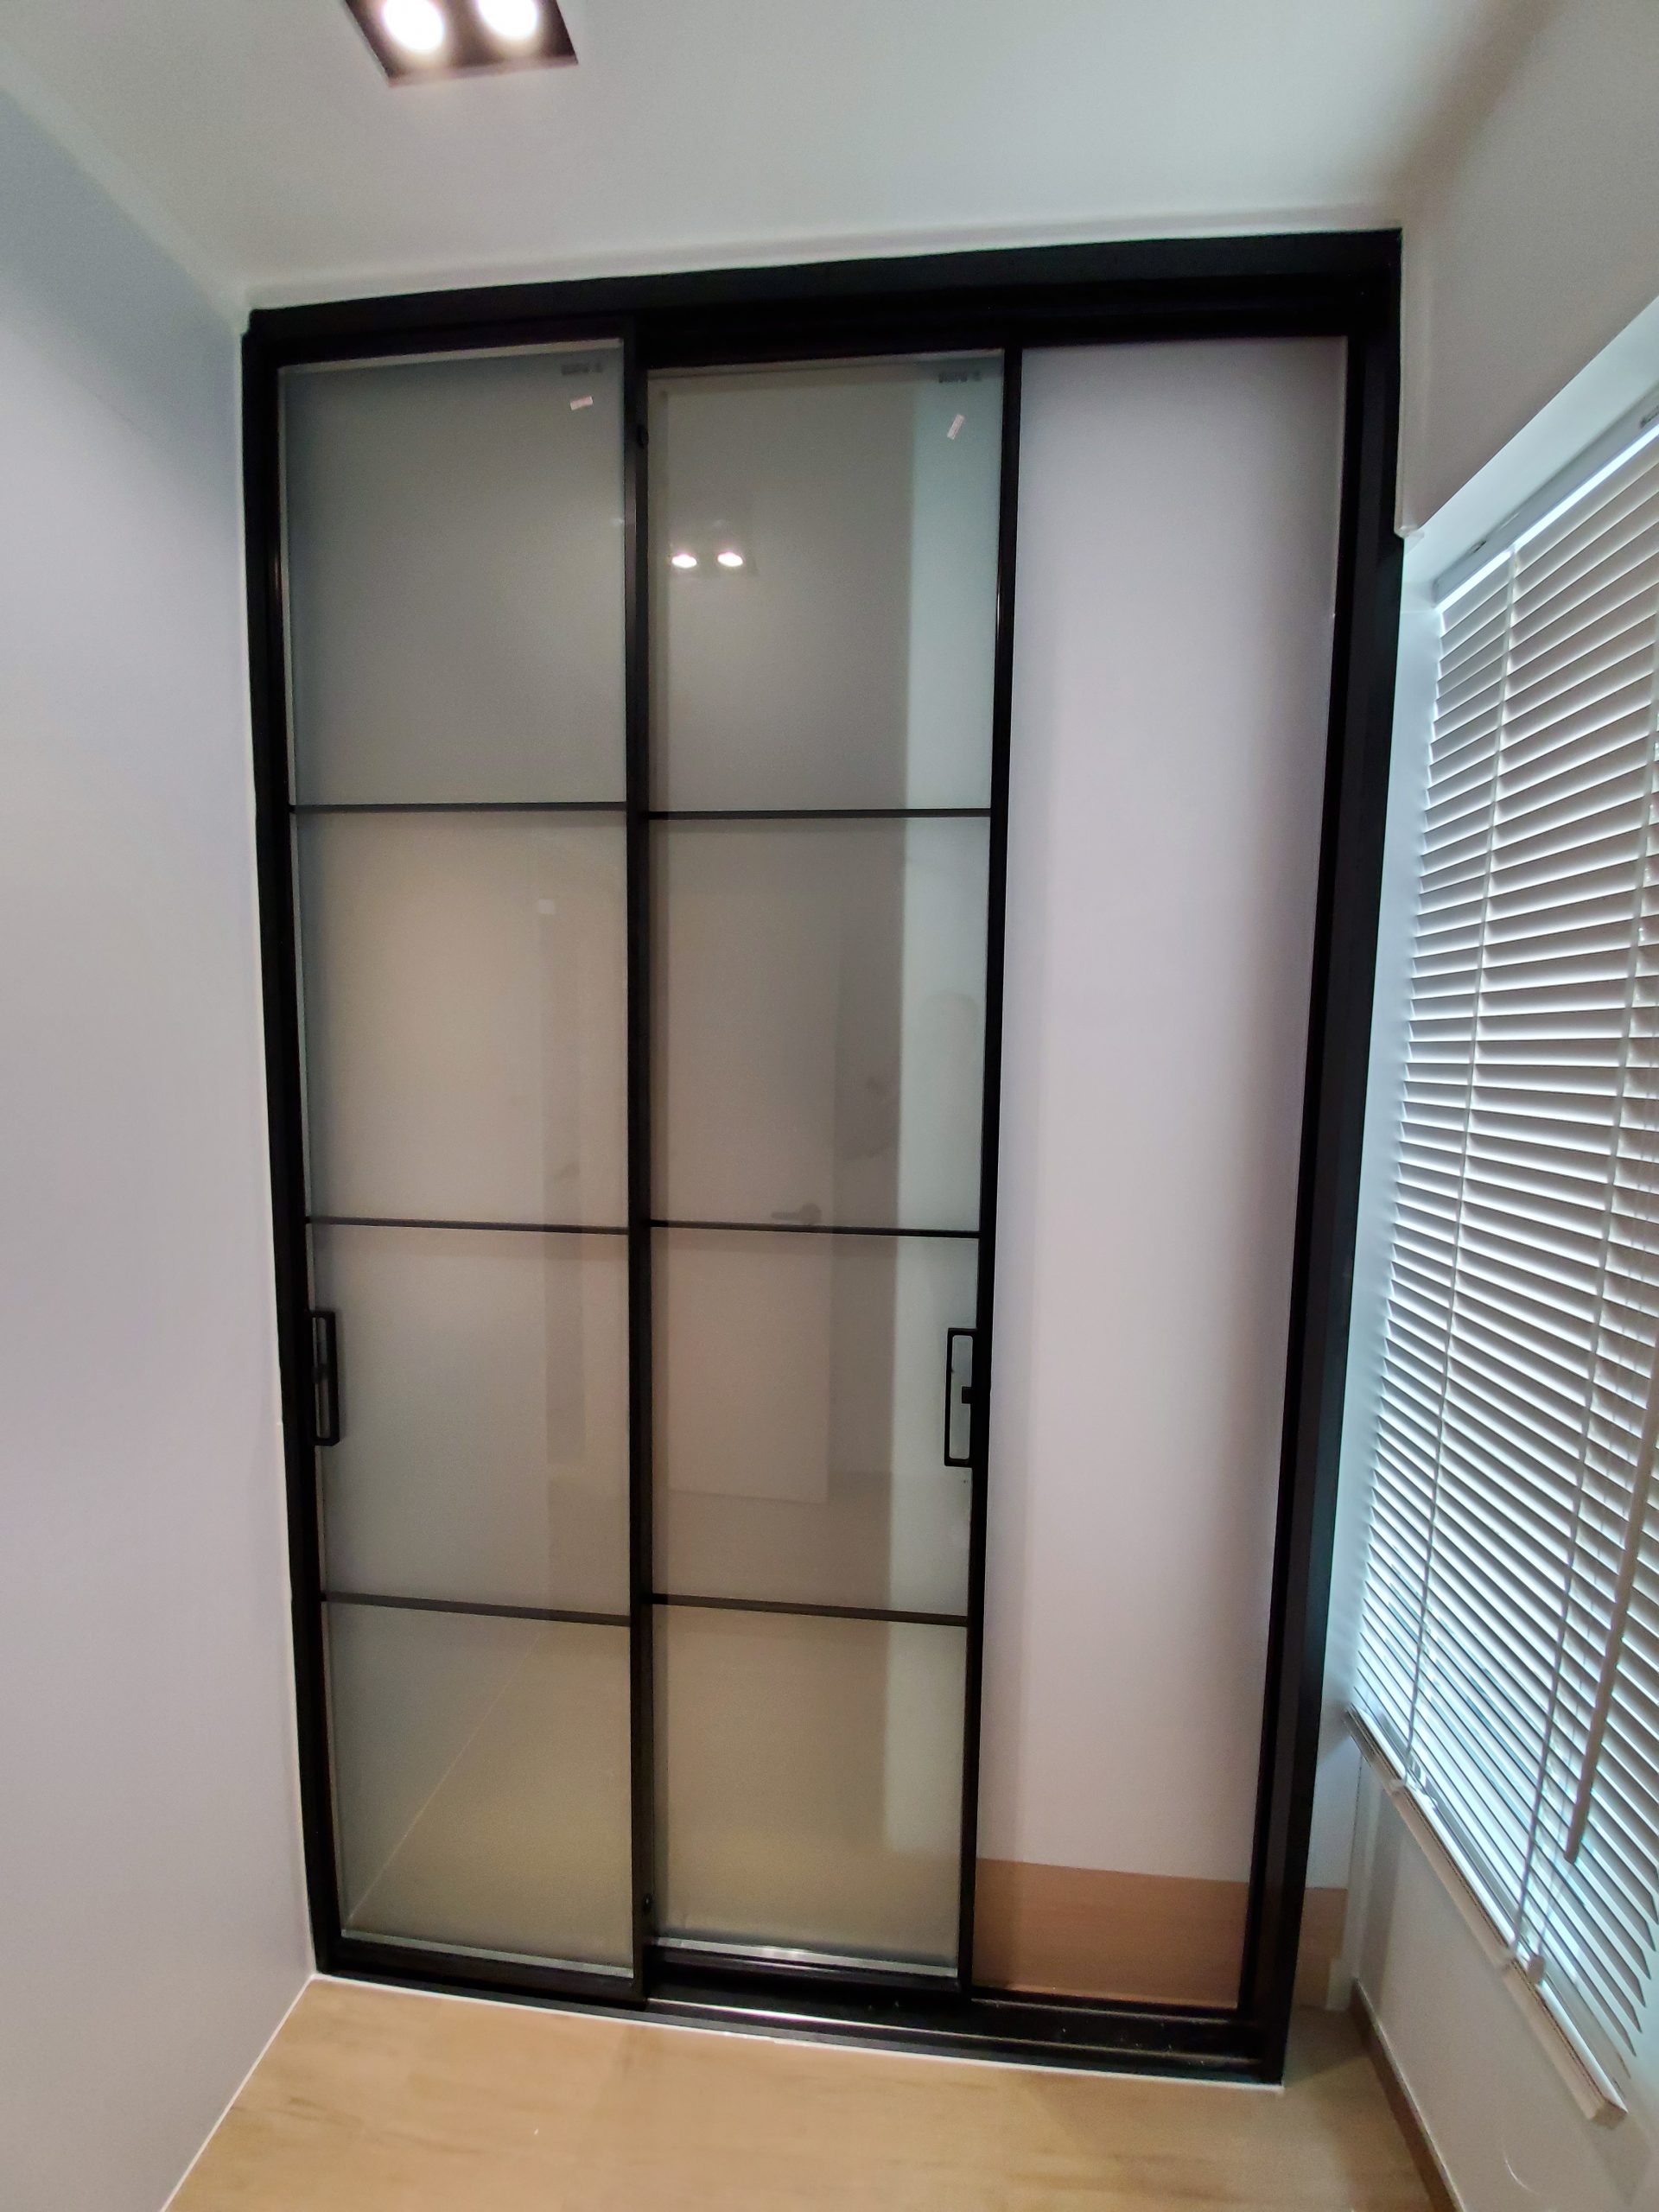 <p>Two Sliding Door in Narrow Frame System</p>
